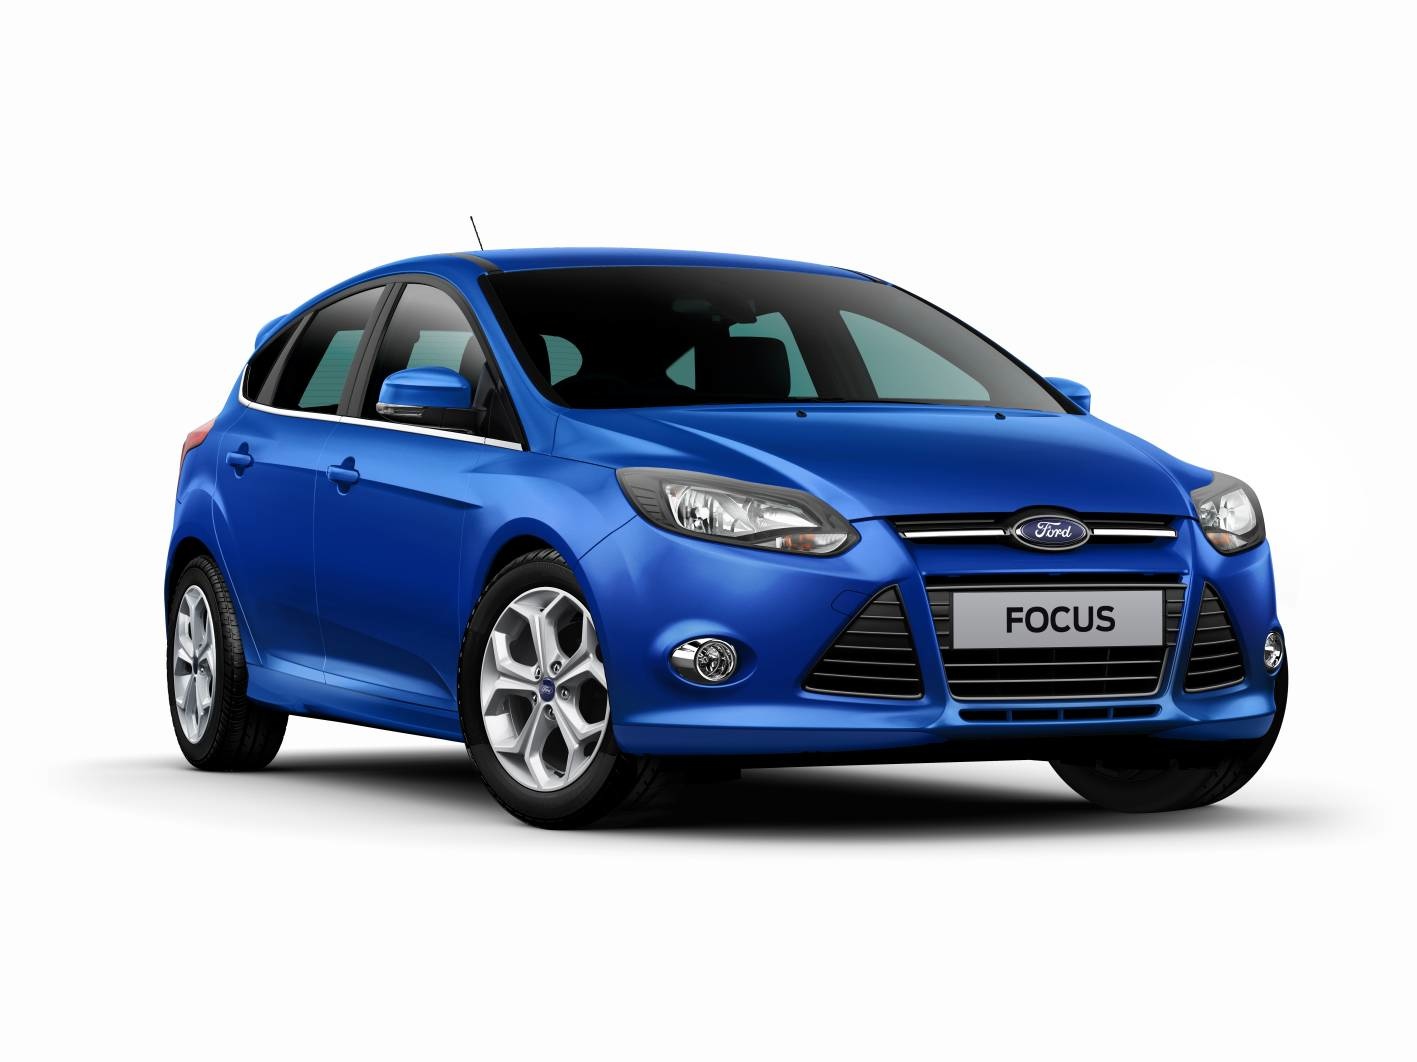 Updated 2014 Ford Focus MKII now on sale, adds safety features